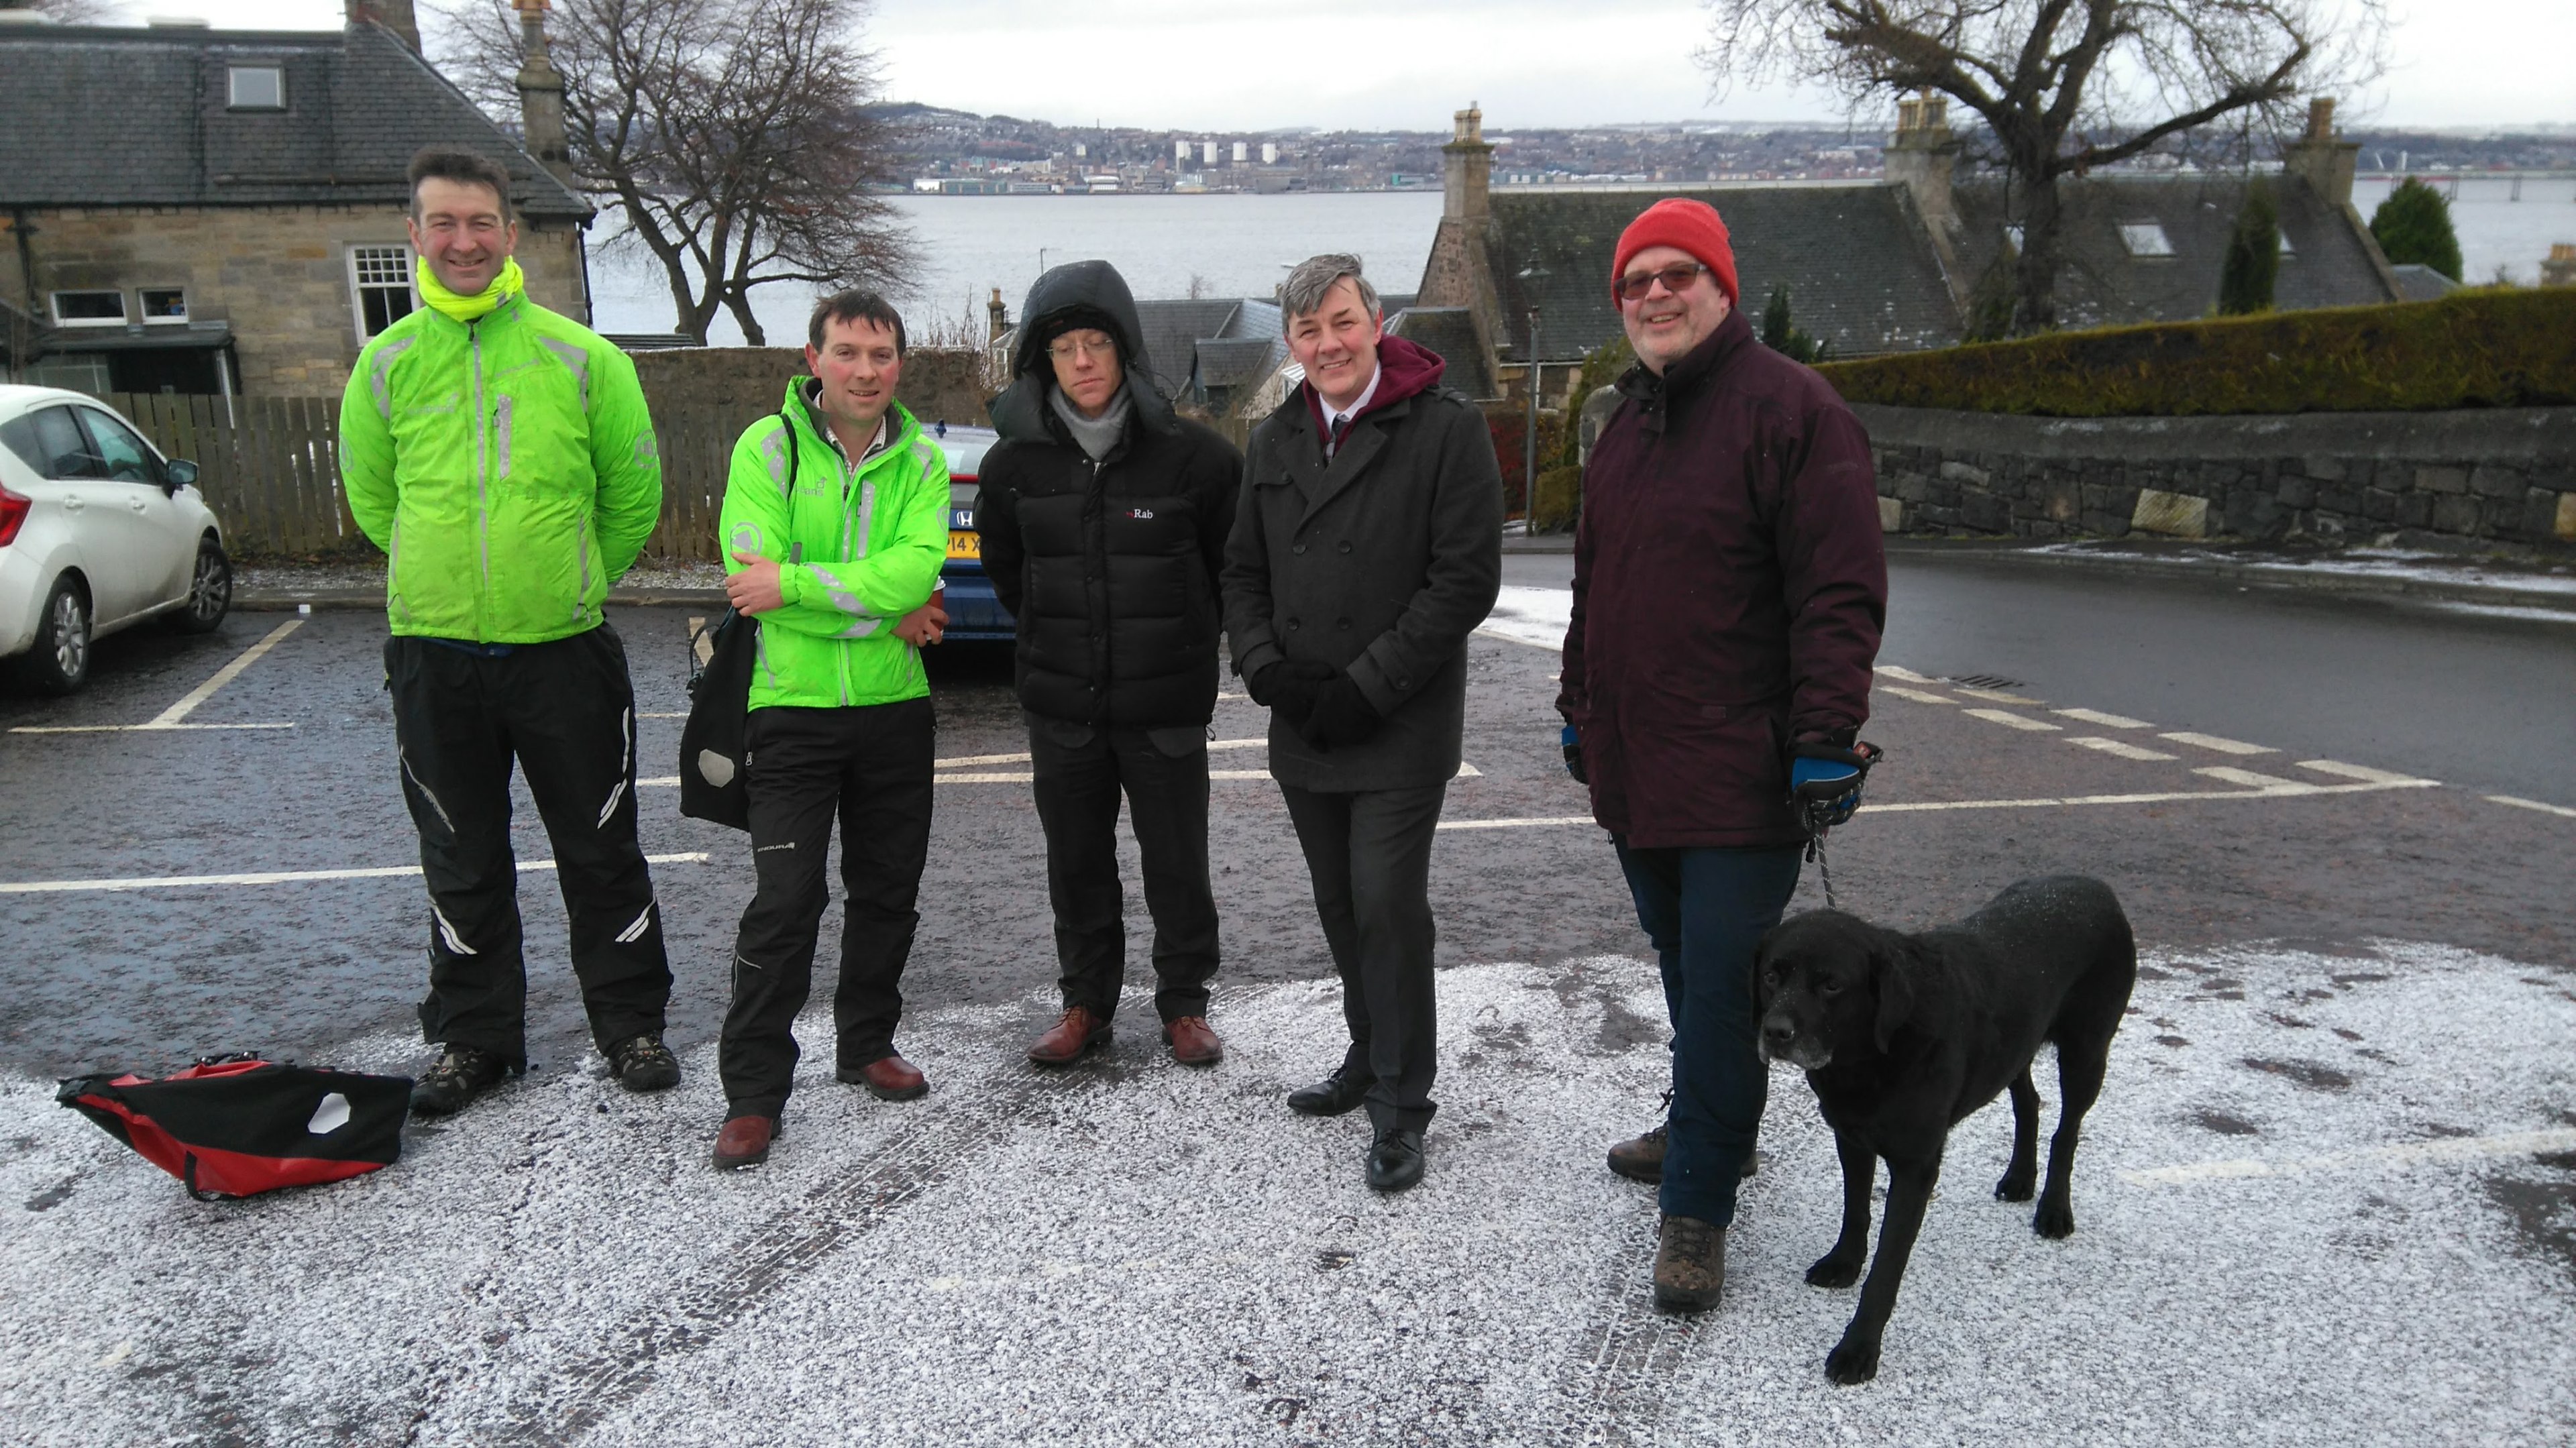 Participants in the walk photo: left to right: Neil Malone and Philip Kearney of Sustans, John Mitchell, Fife Council senior manager for roads and transportation, Councillor Altany Craik, Councillor Johnny Tepp.